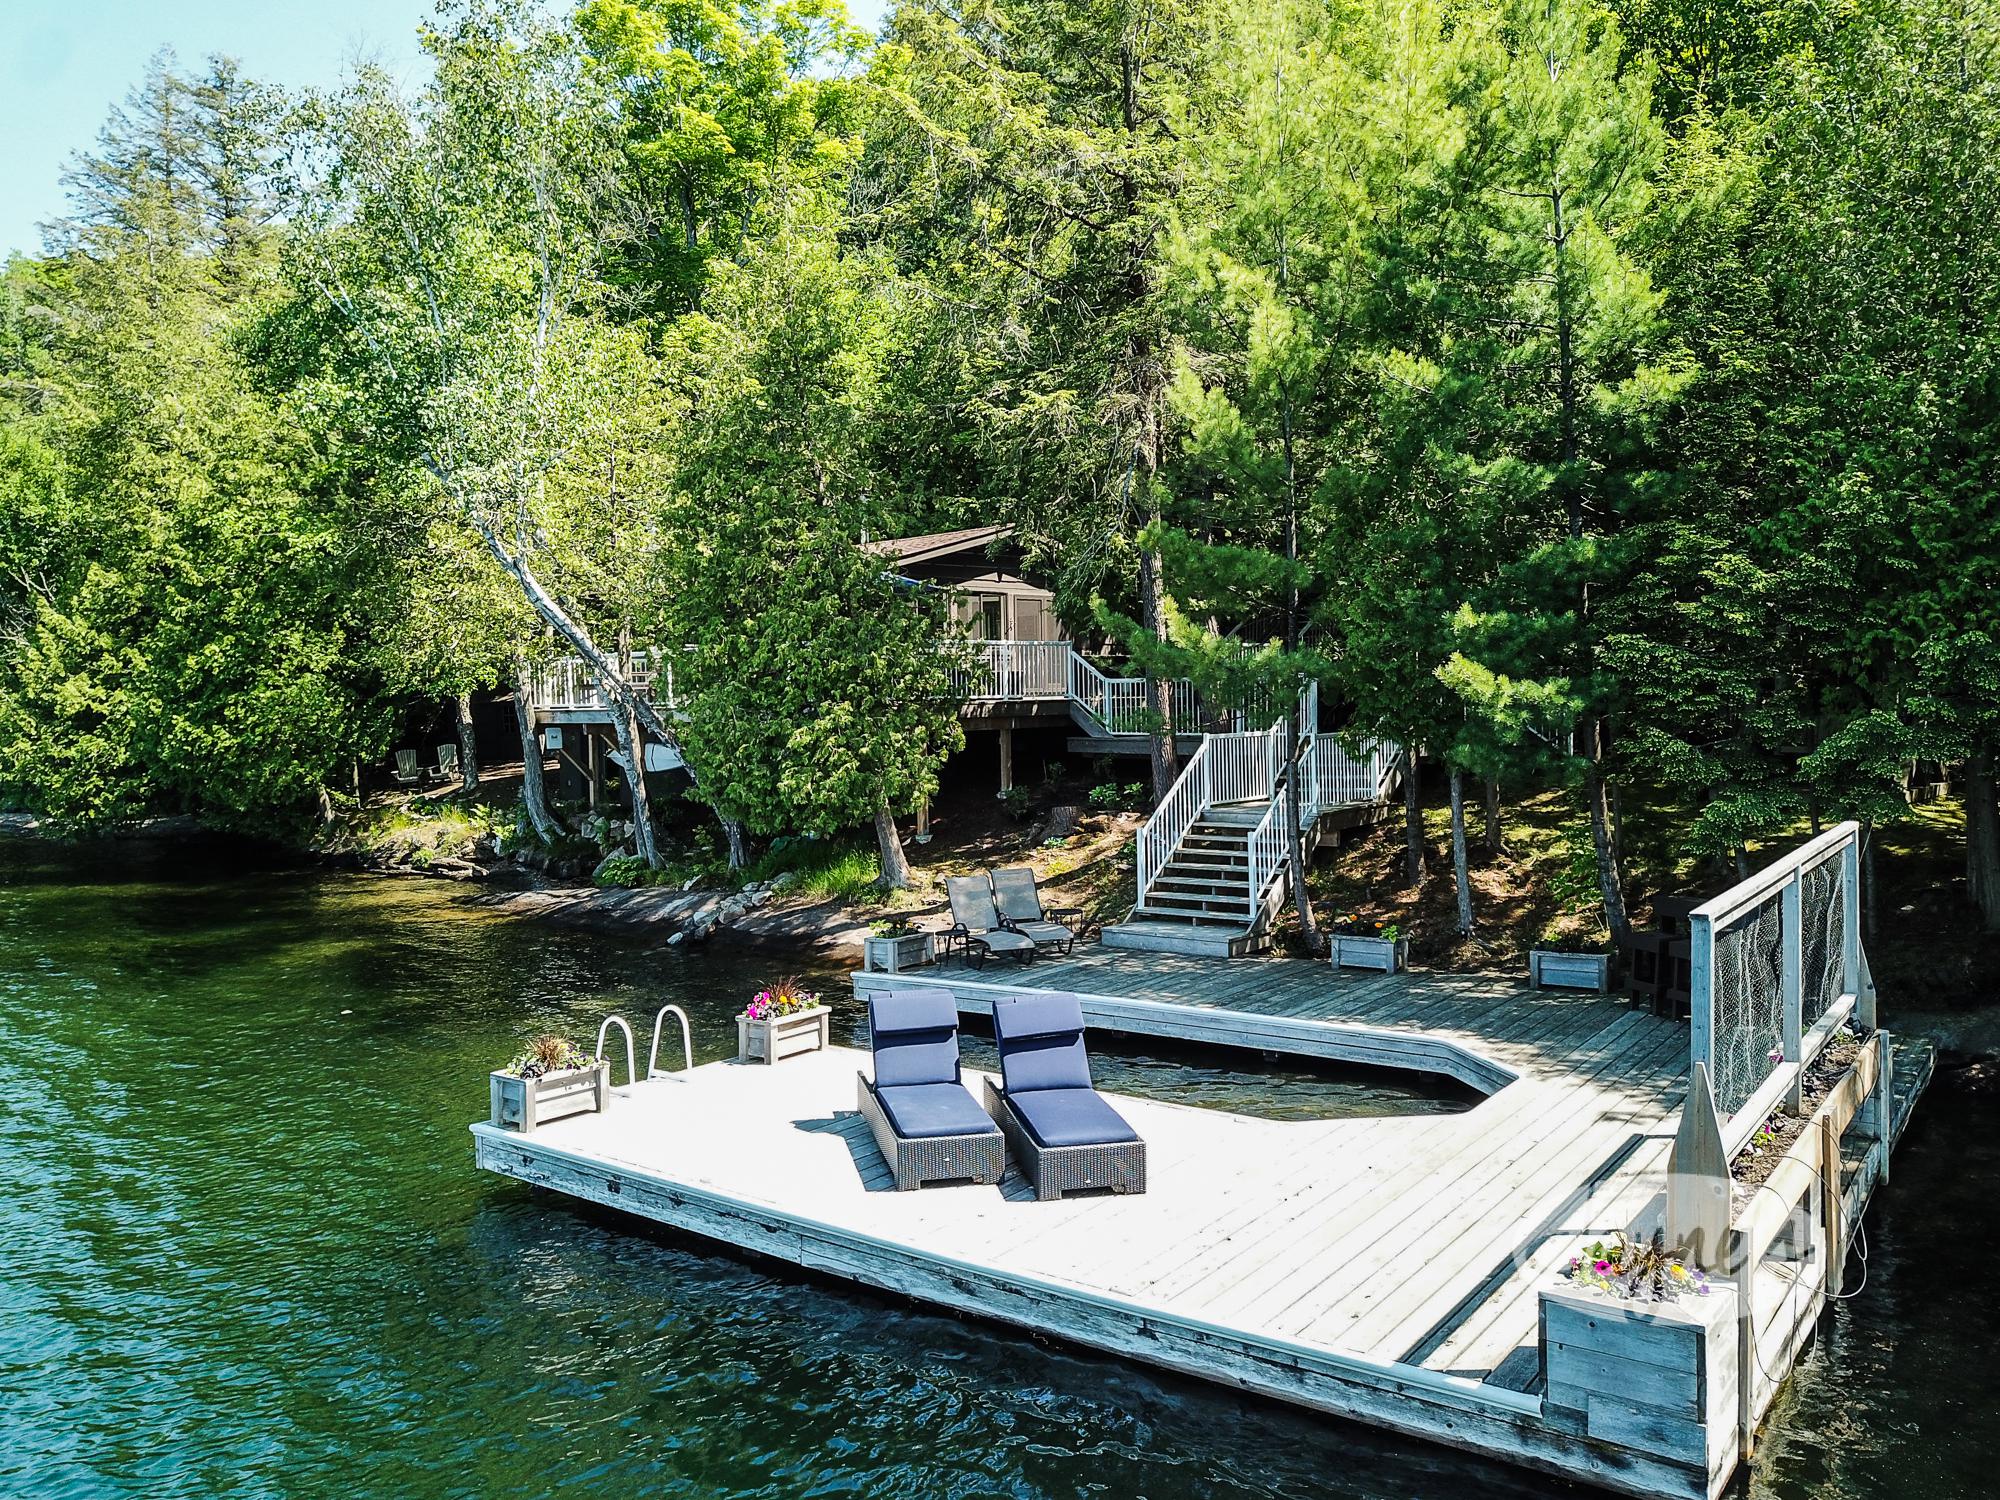 Lakeside Dream Property on Lake Rosseau - Jayne's Luxurious Rentals | Secluded cabin retreat with private dock and lounge chairs